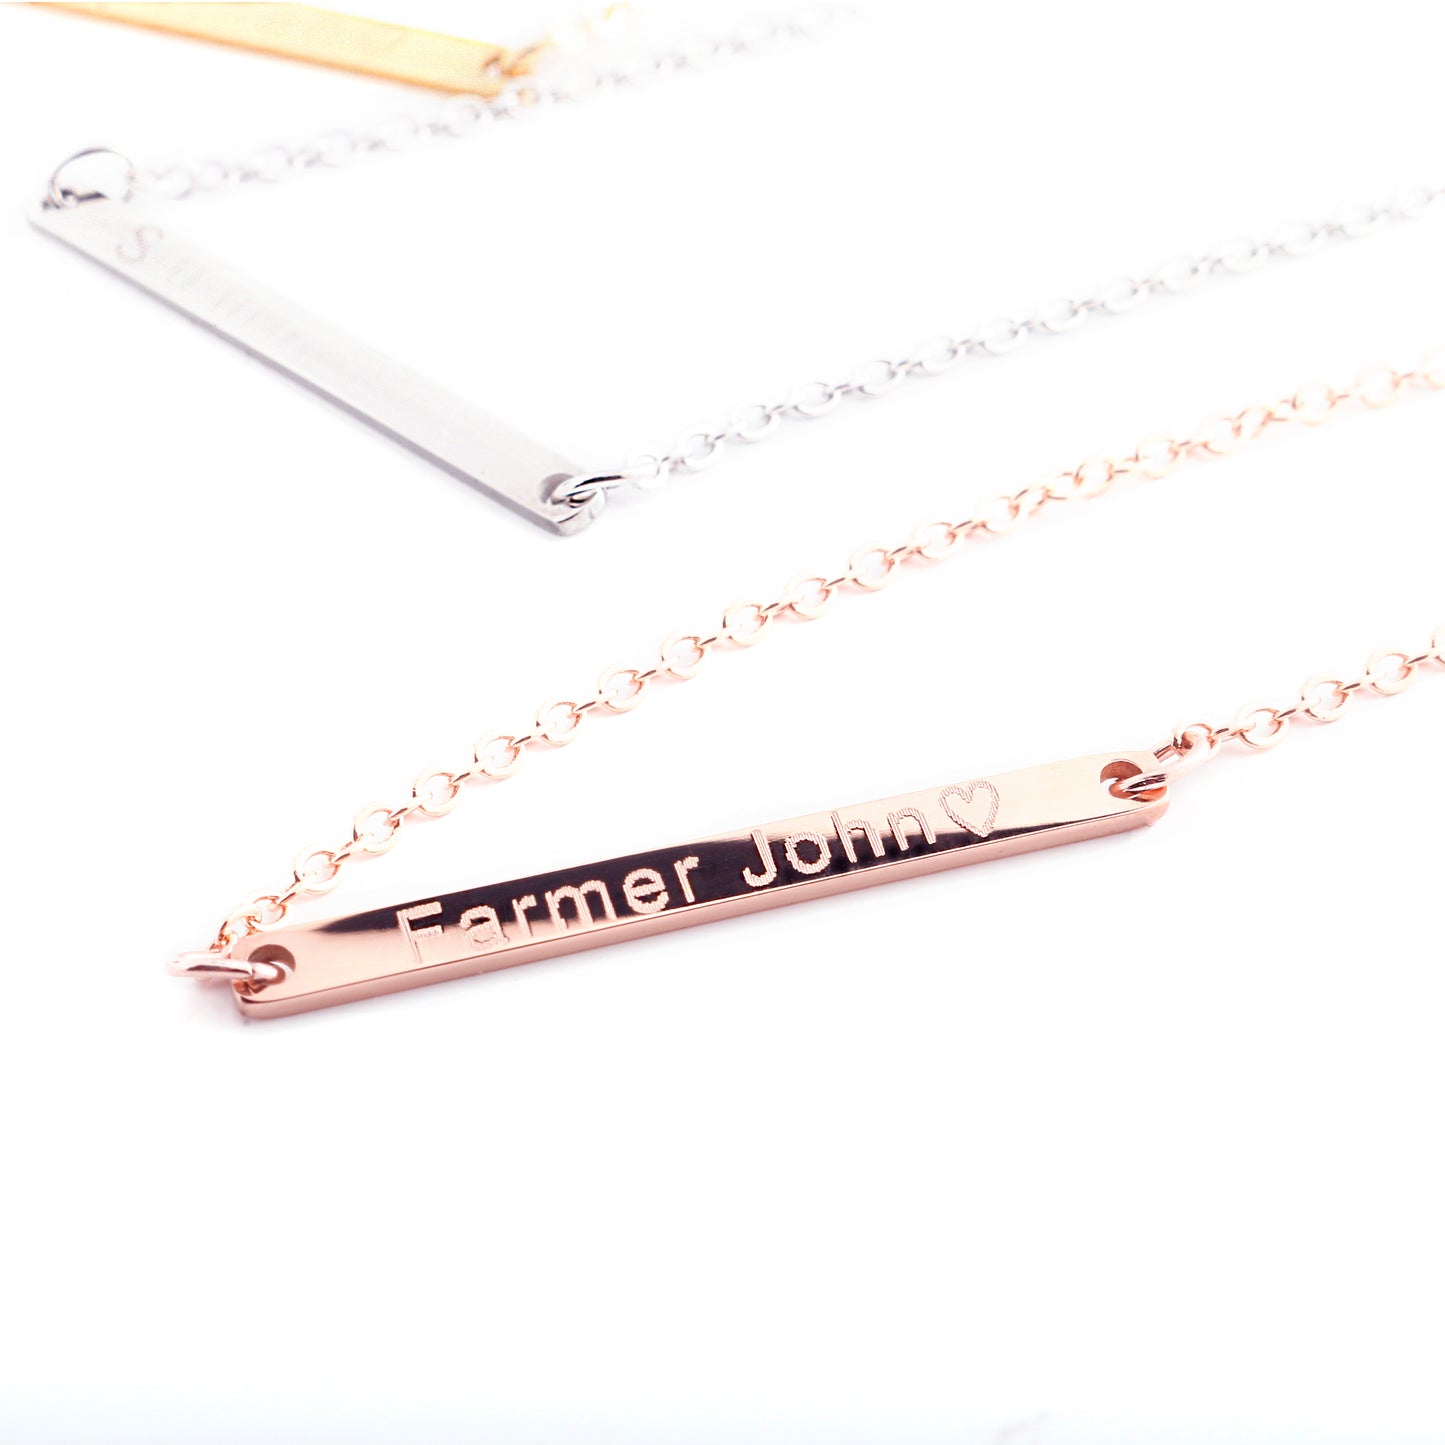 Personalize Engraving Bar Necklaces for Women